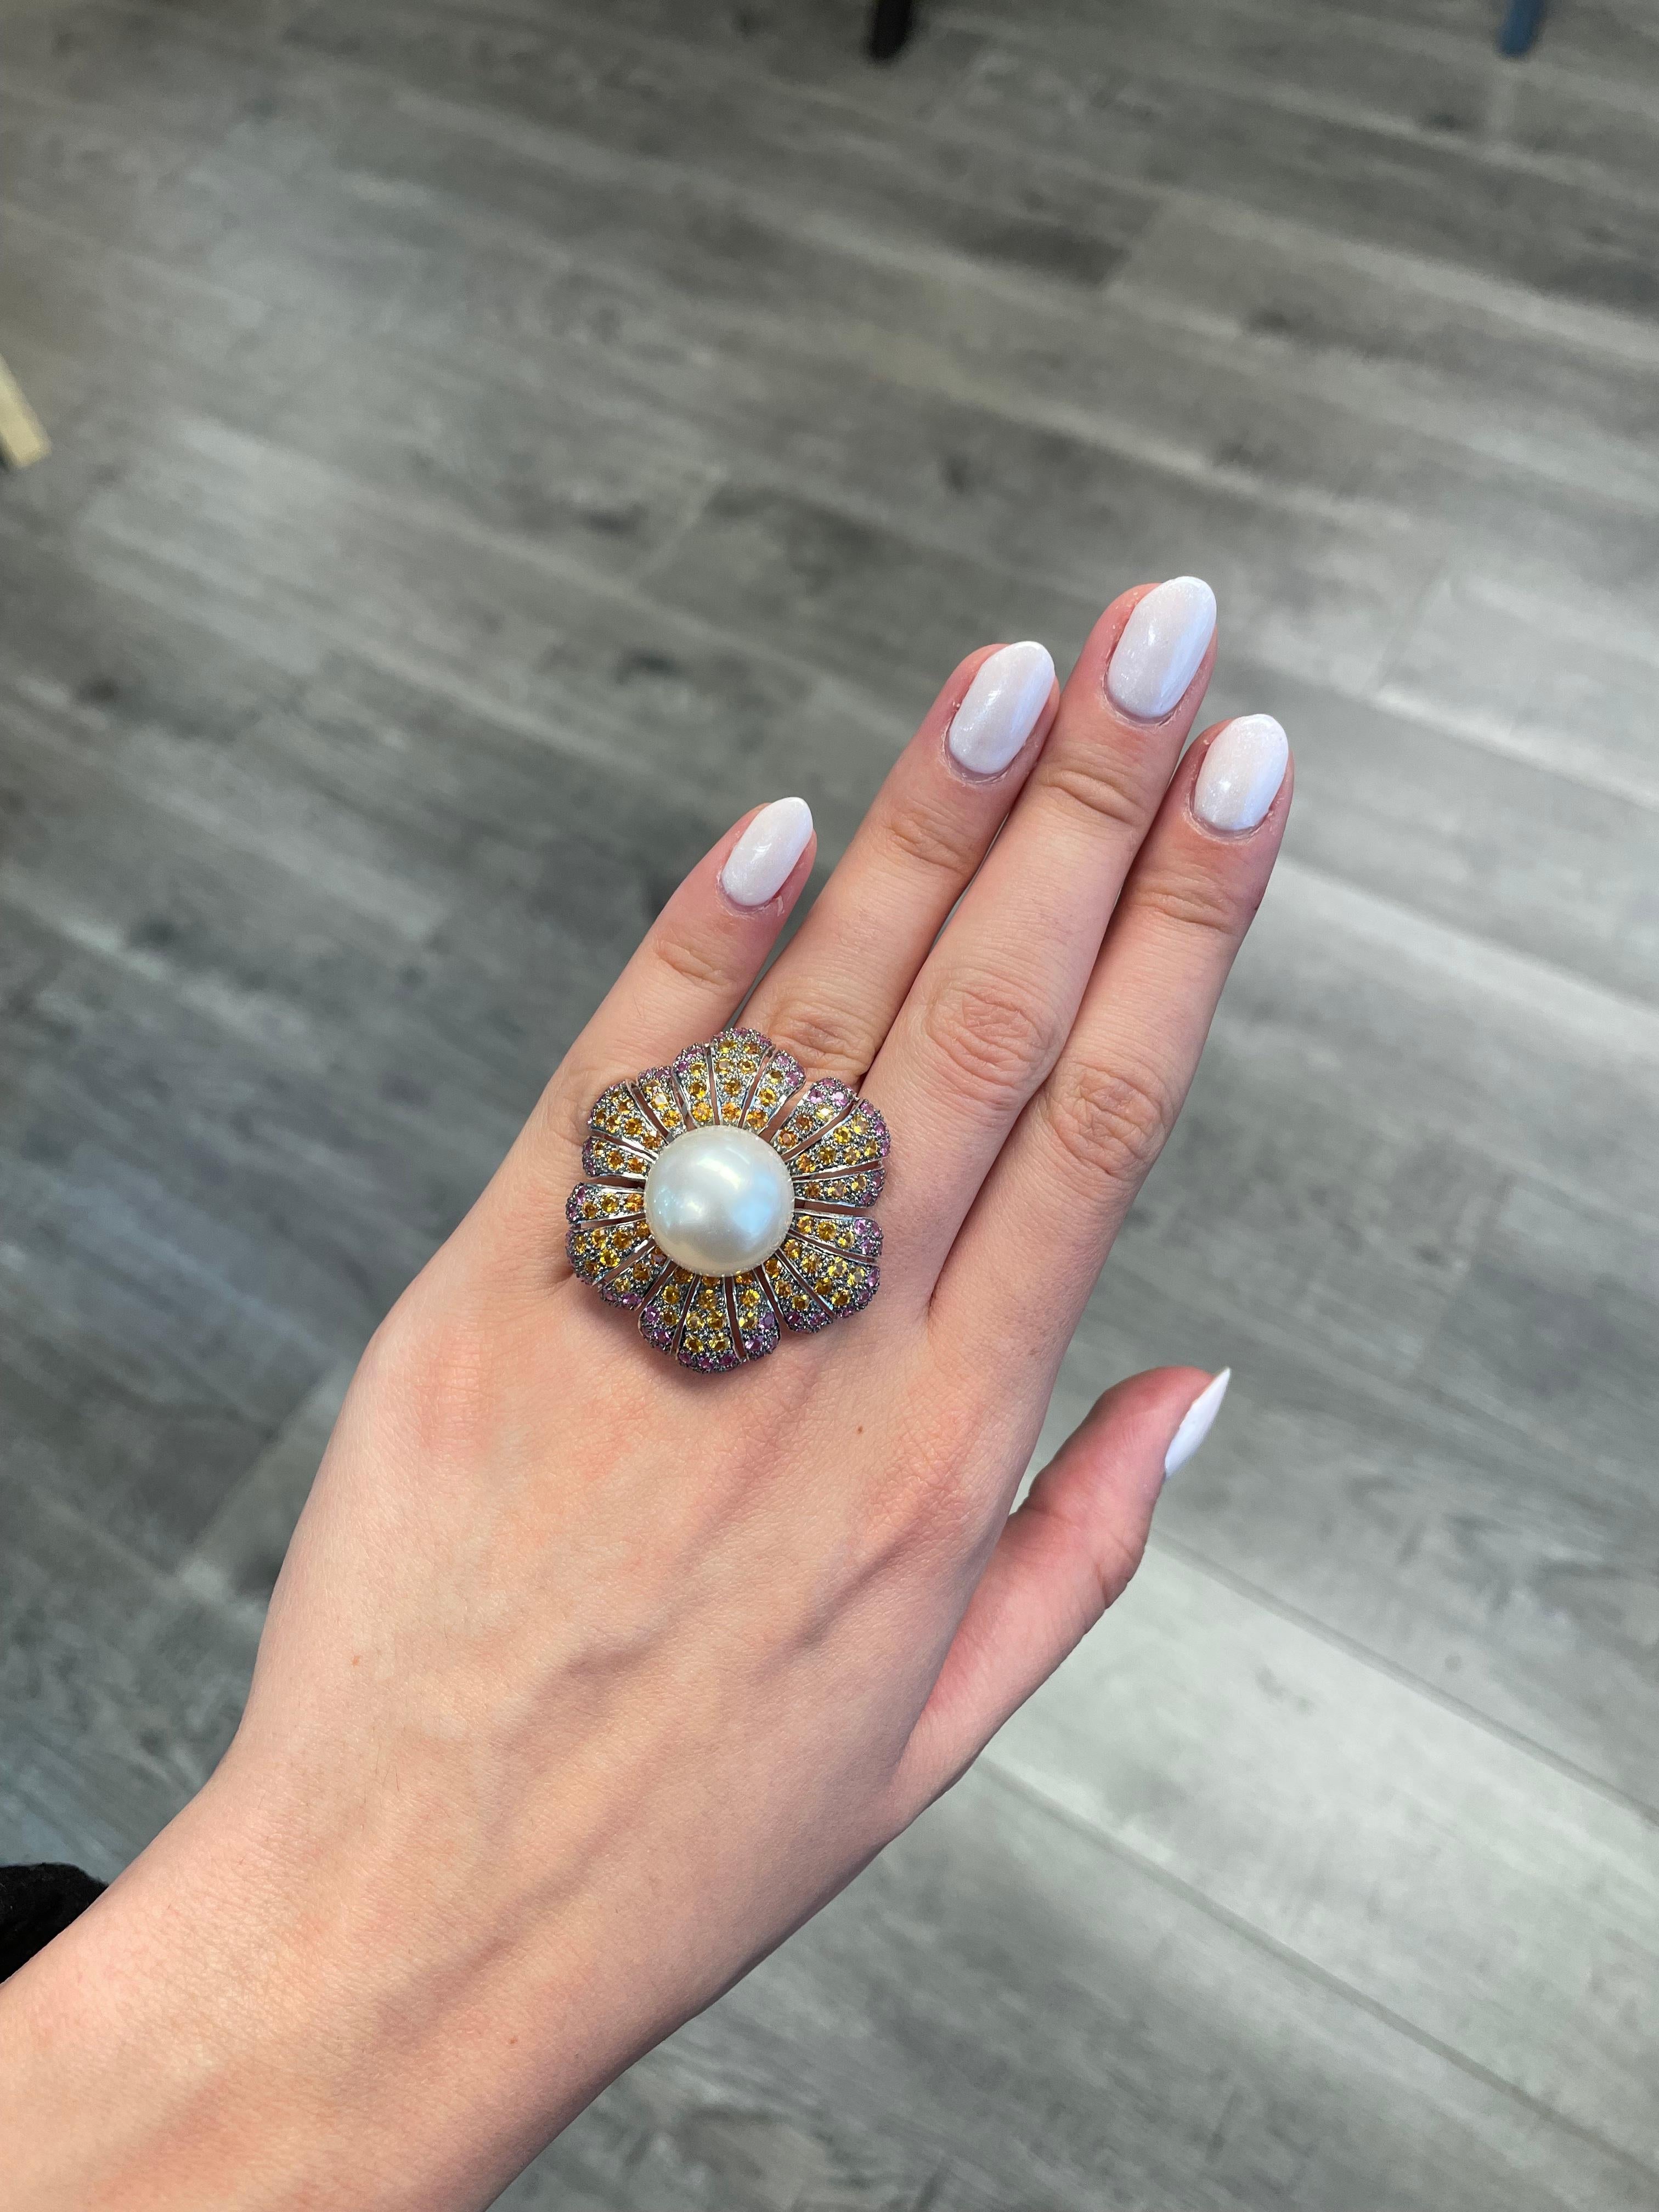 Exquisite and unique multi gemstone floral ring. 
Center South Sea pearl surrounded by 3.55ct of pink sapphires heat and 3.20ct of yellow & orange sapphires. 6.75ct total gemstone weight set in 18-karat white gold with black rhodium. 
Accommodated